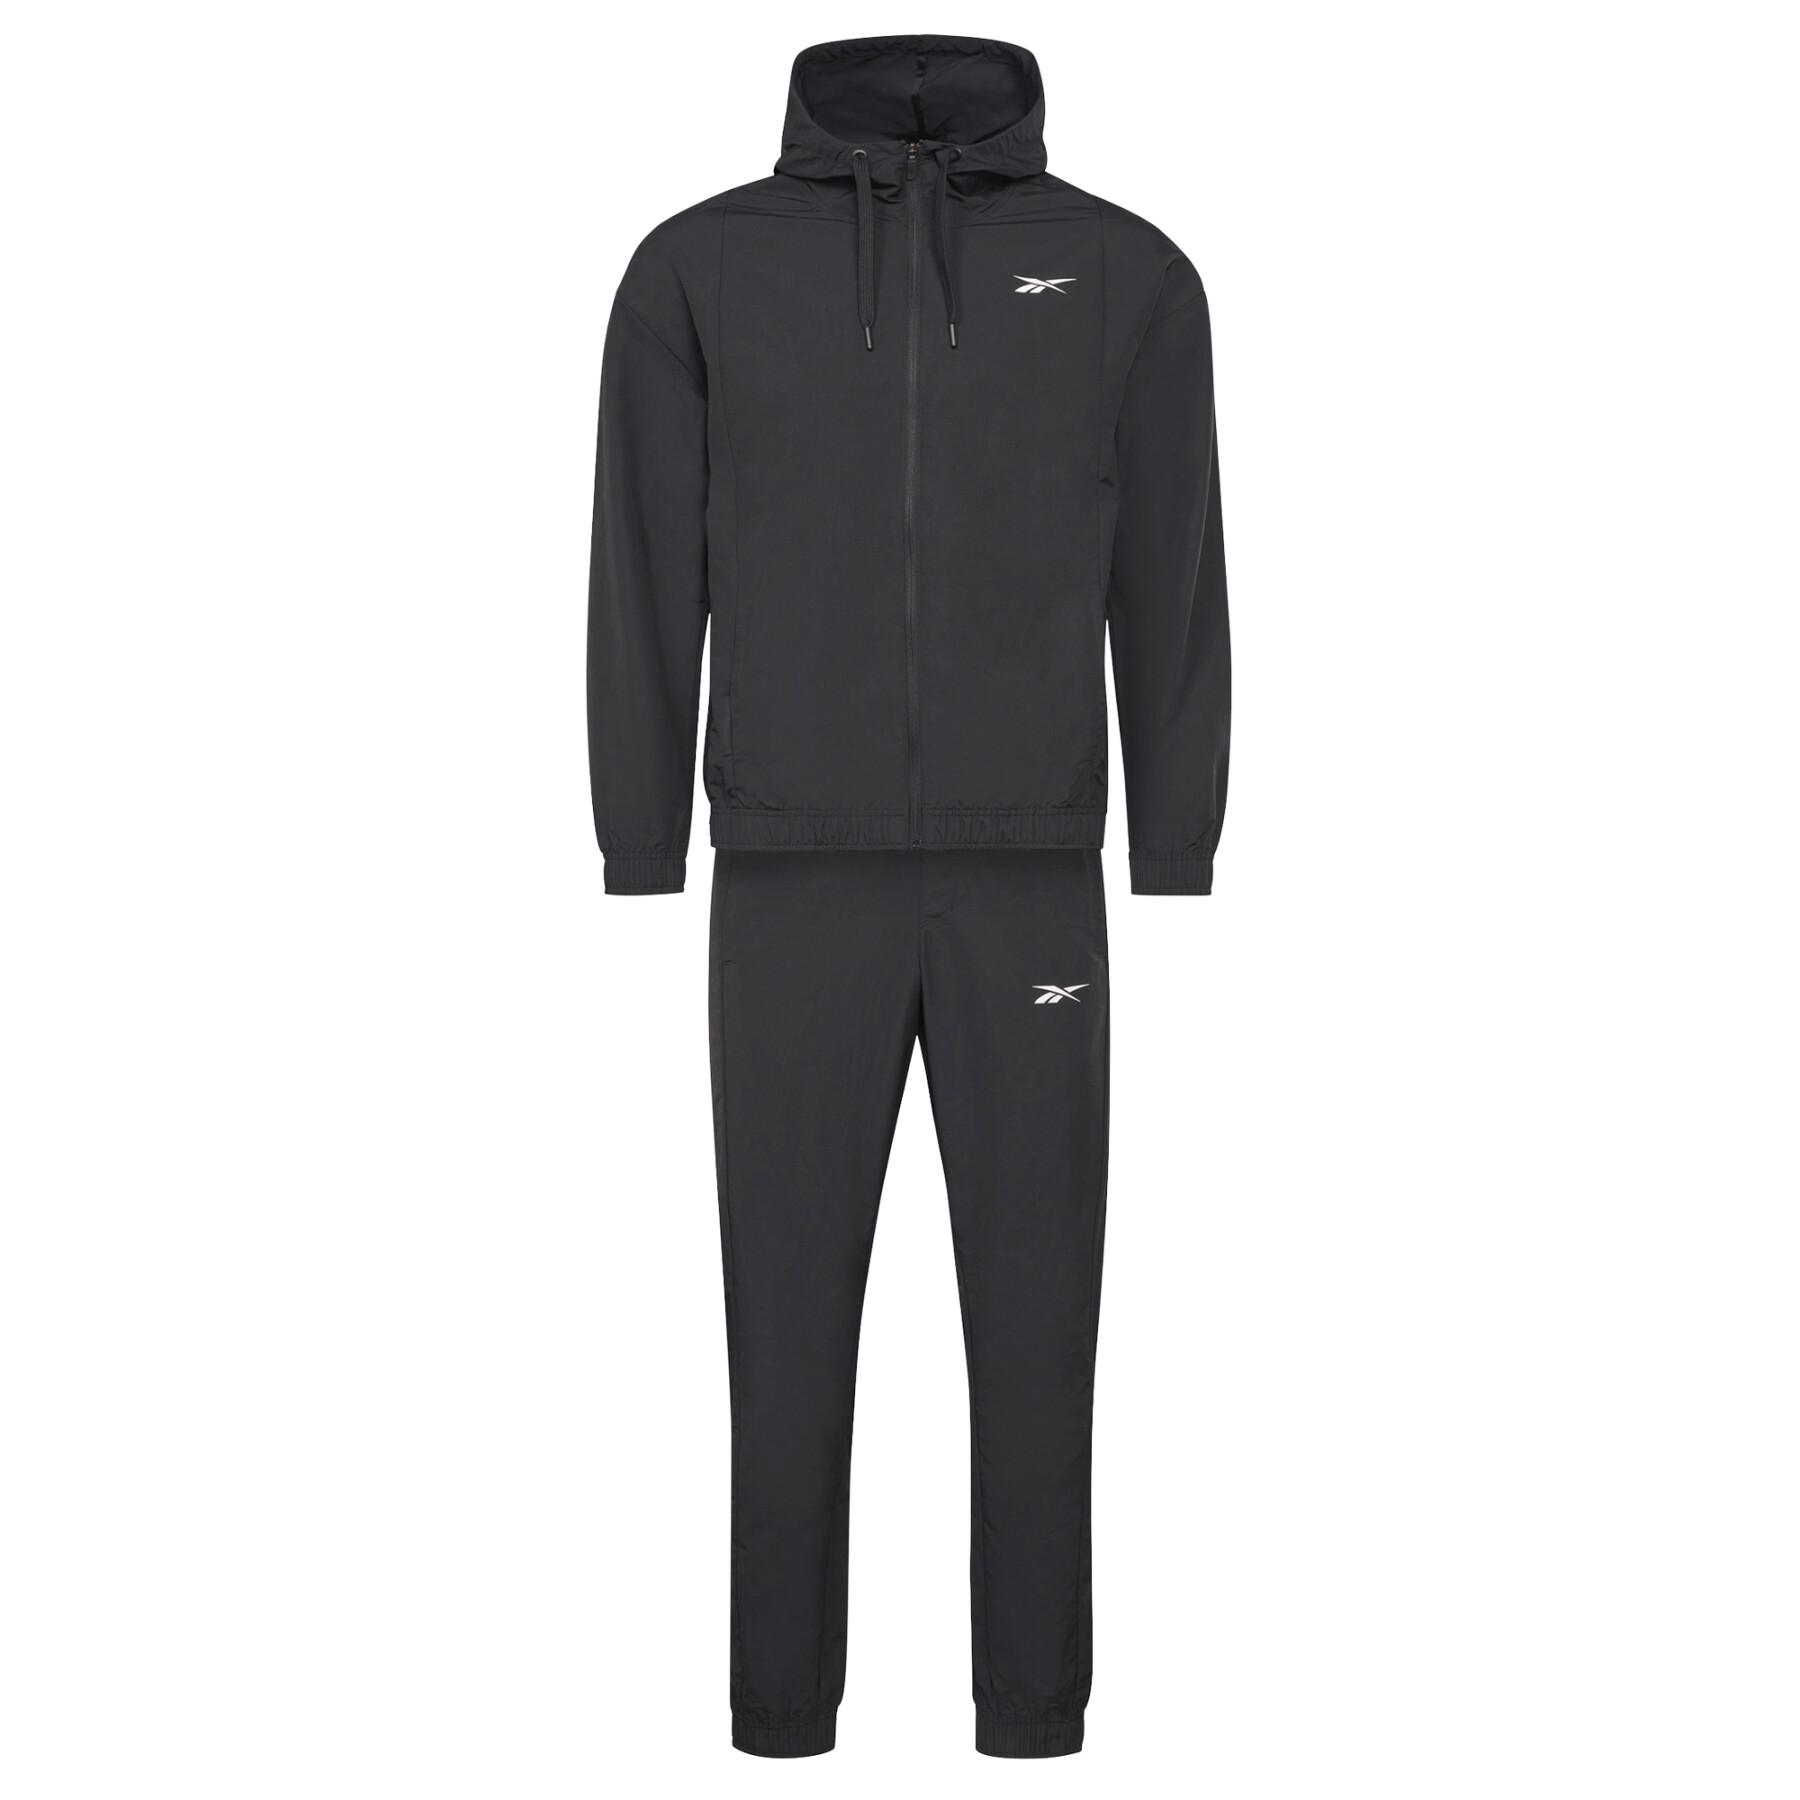 Tracksuit Reebok Techstyle - Tracksuits - Men's Clothing - Fitness